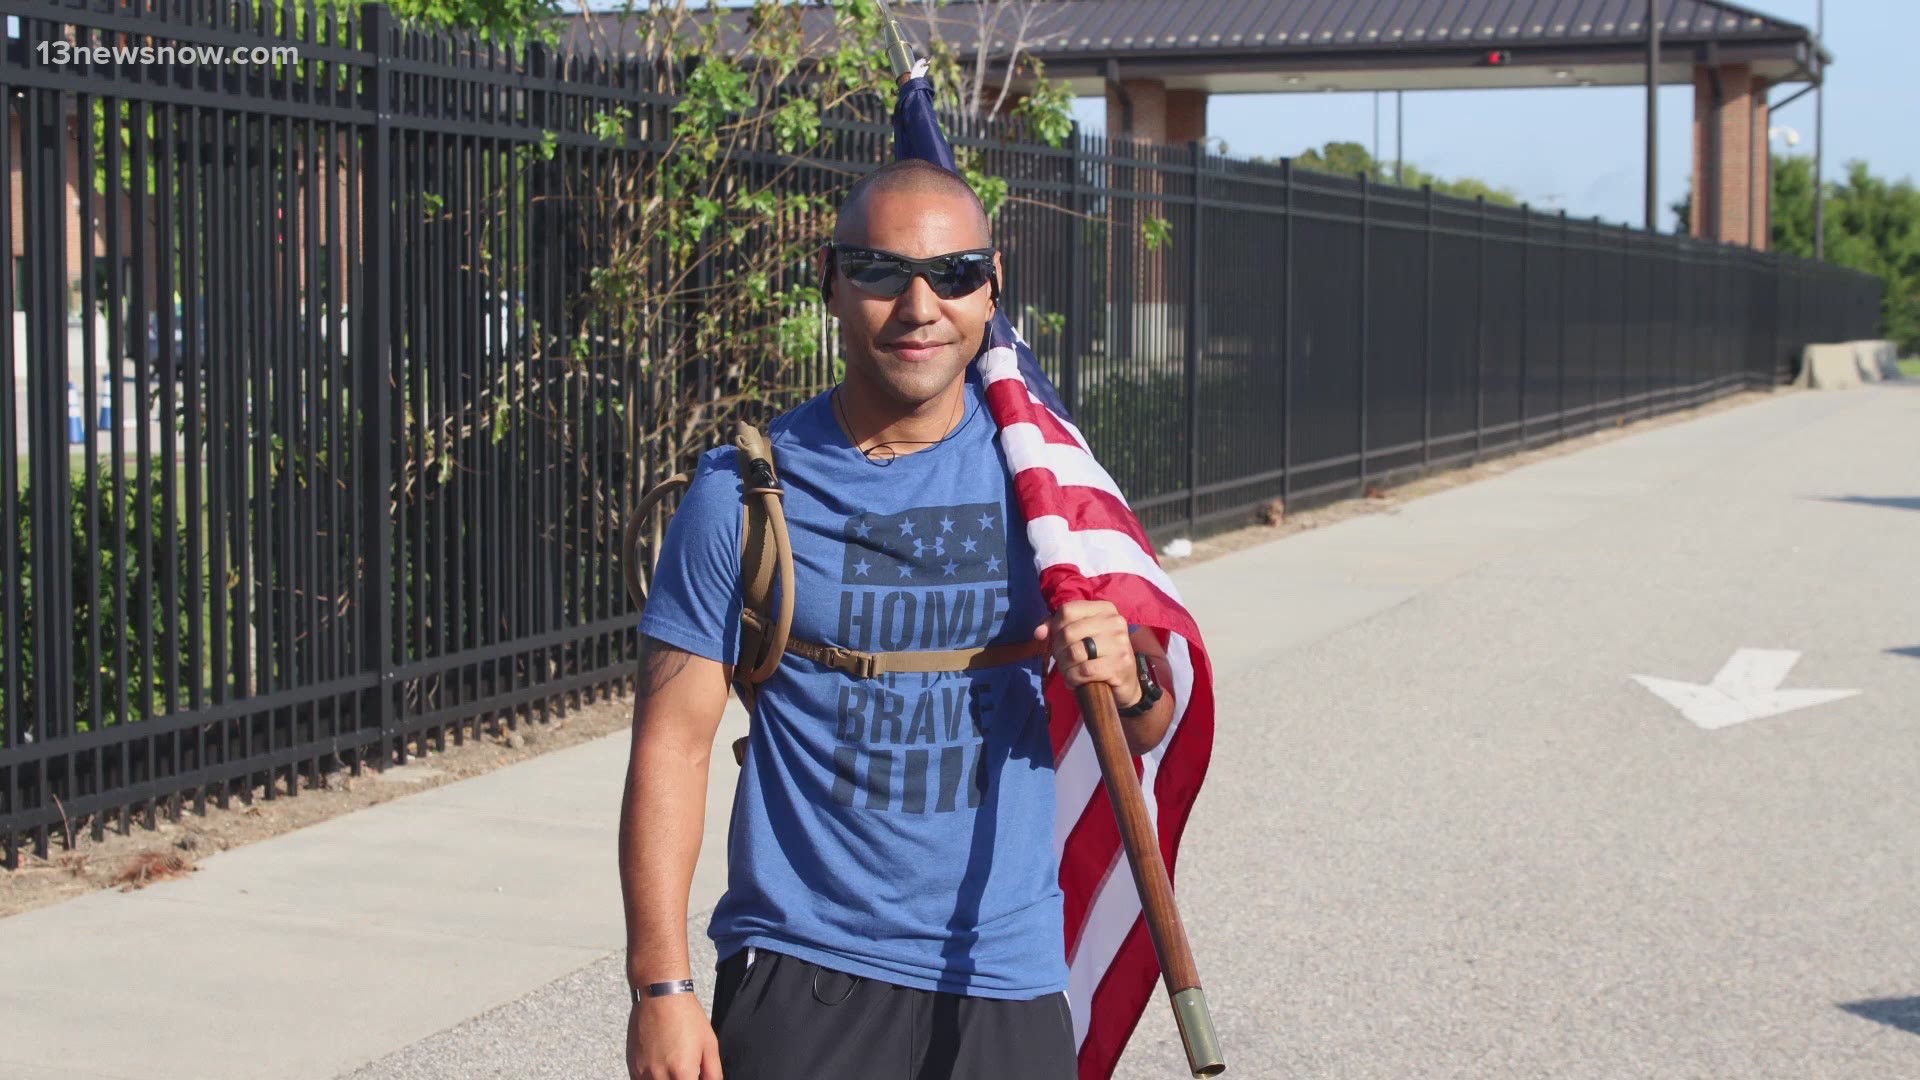 Every year, Department of Veterans Affairs Police Officer Sgt. Bryan Skipworth runs to honor the fallen and the first responders.